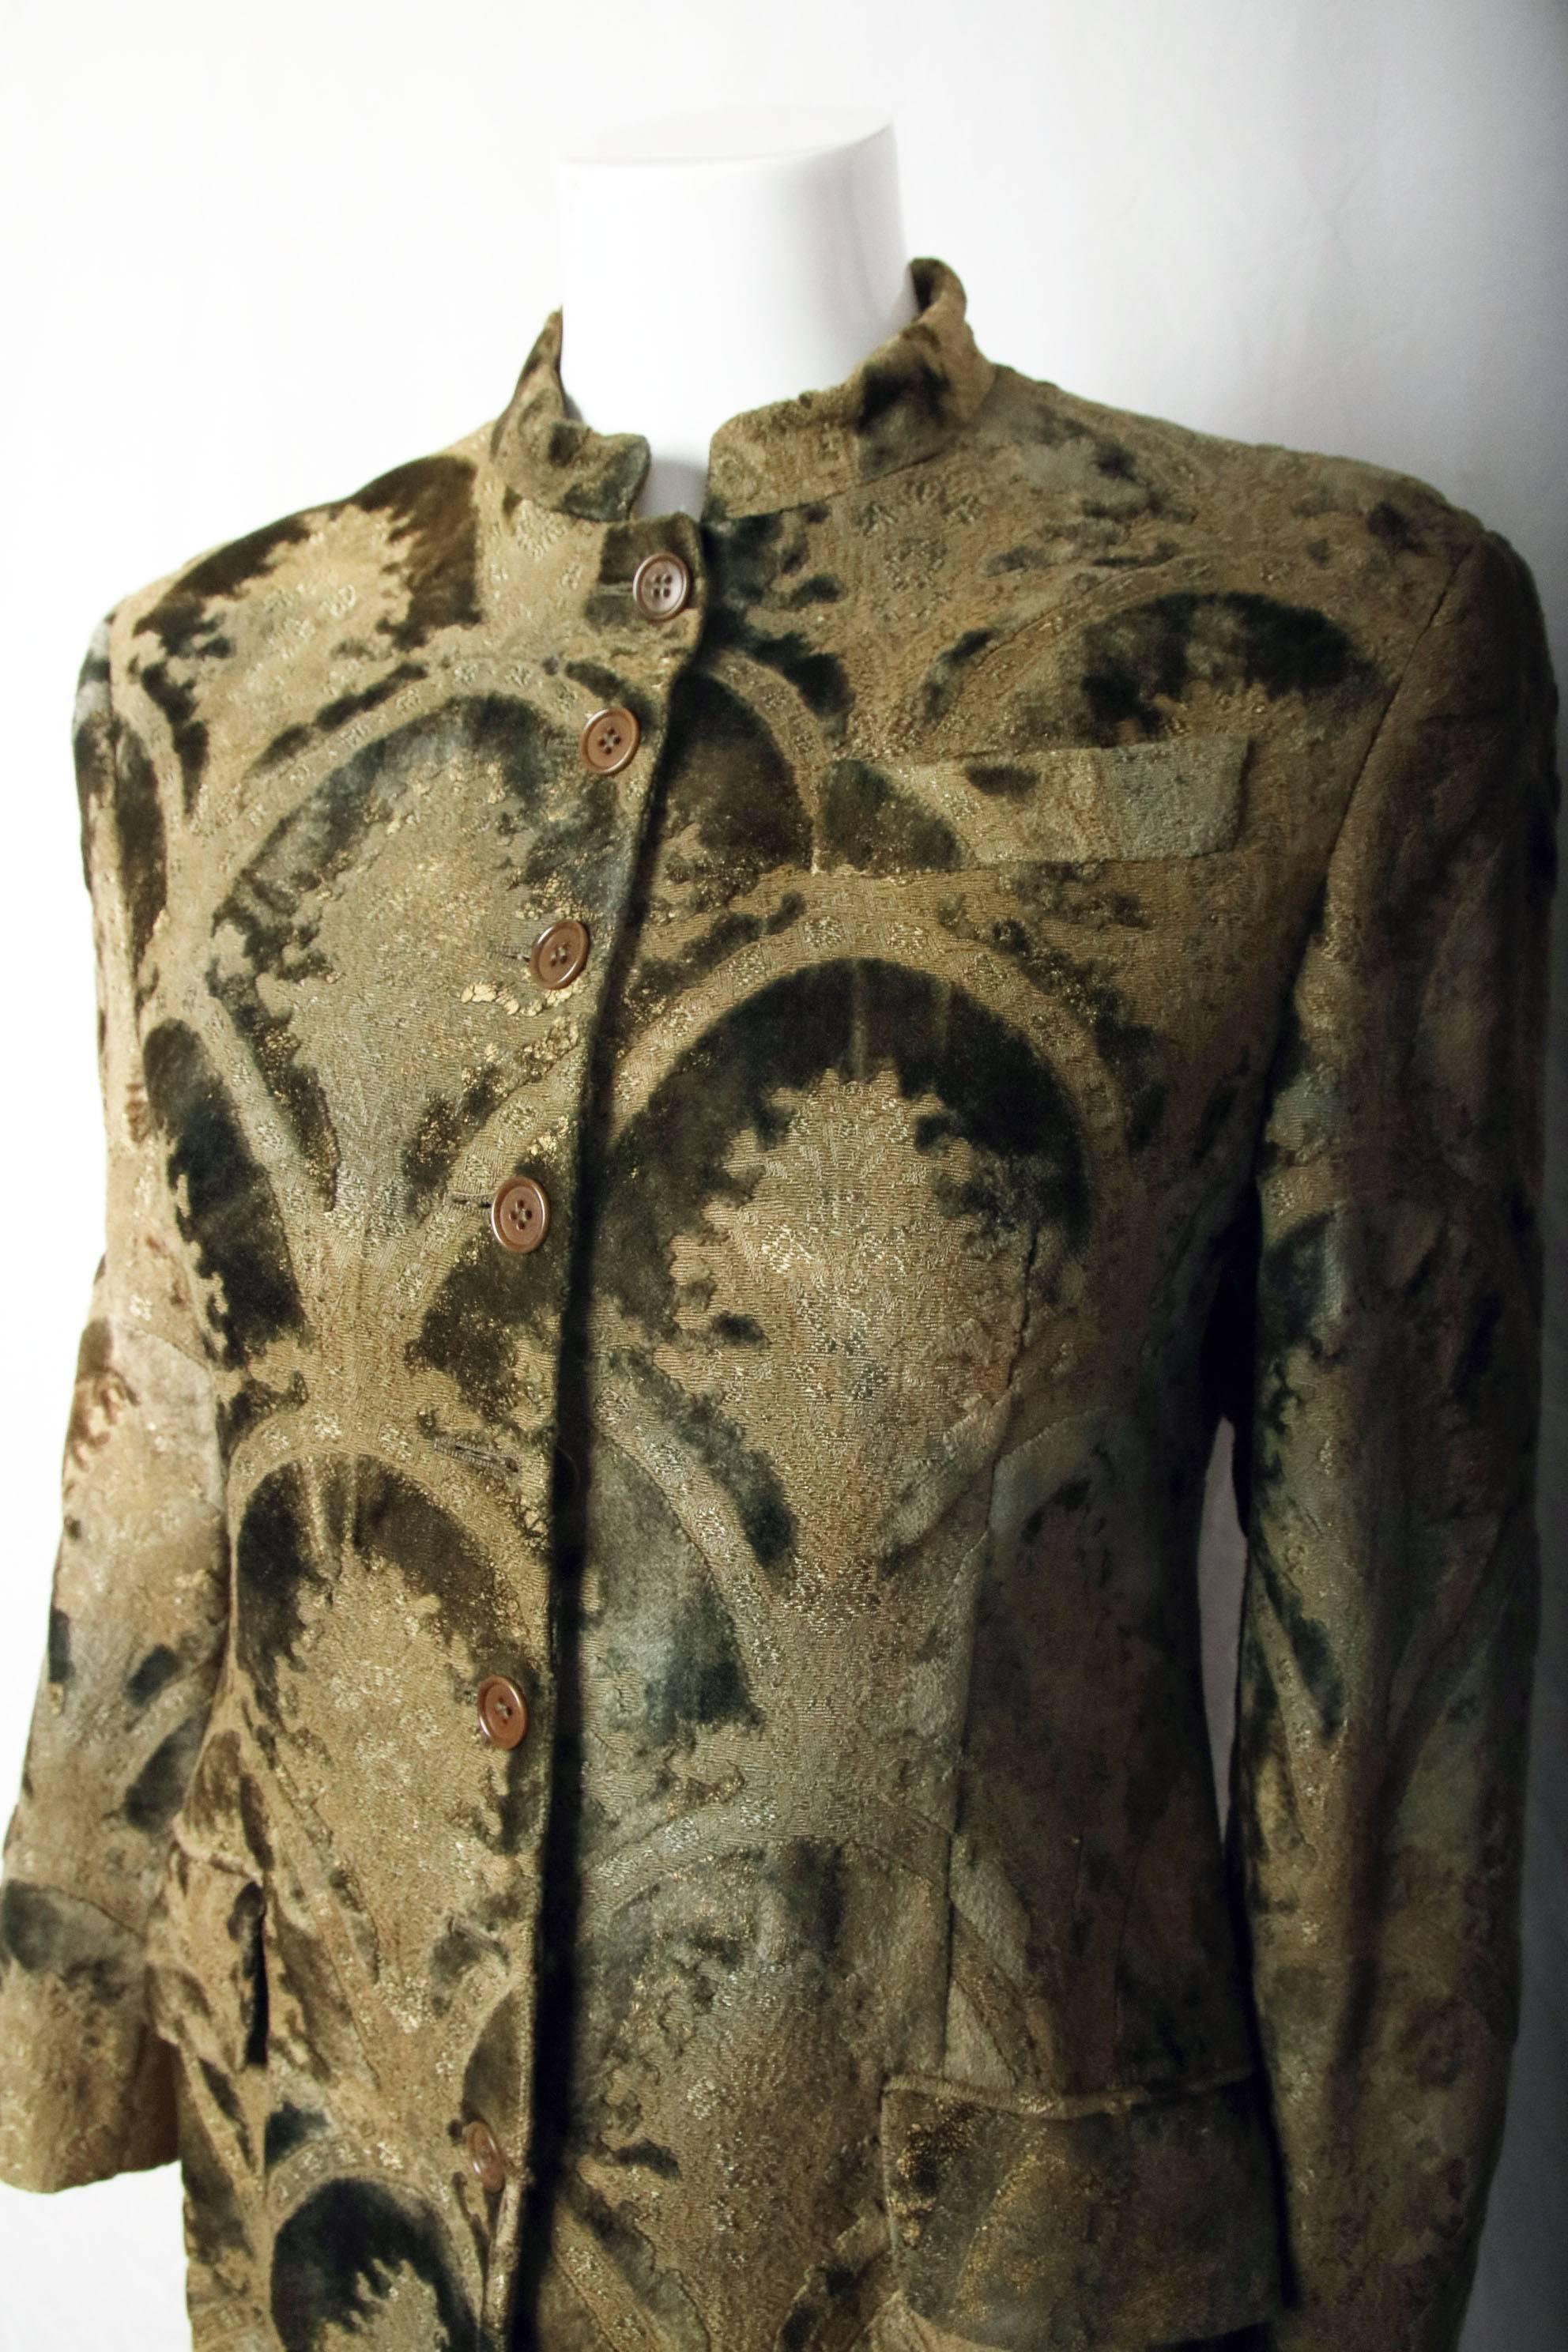 A gorgeous circa 1989 Romeo Gigli sage/pale olive green silk brocade velvet burnout coat with two frontal pockets and breast pocket. Features a long slit at the back and is entirely lined. In excellent condition. size 42
MEASUREMENTS:
Shoulders -